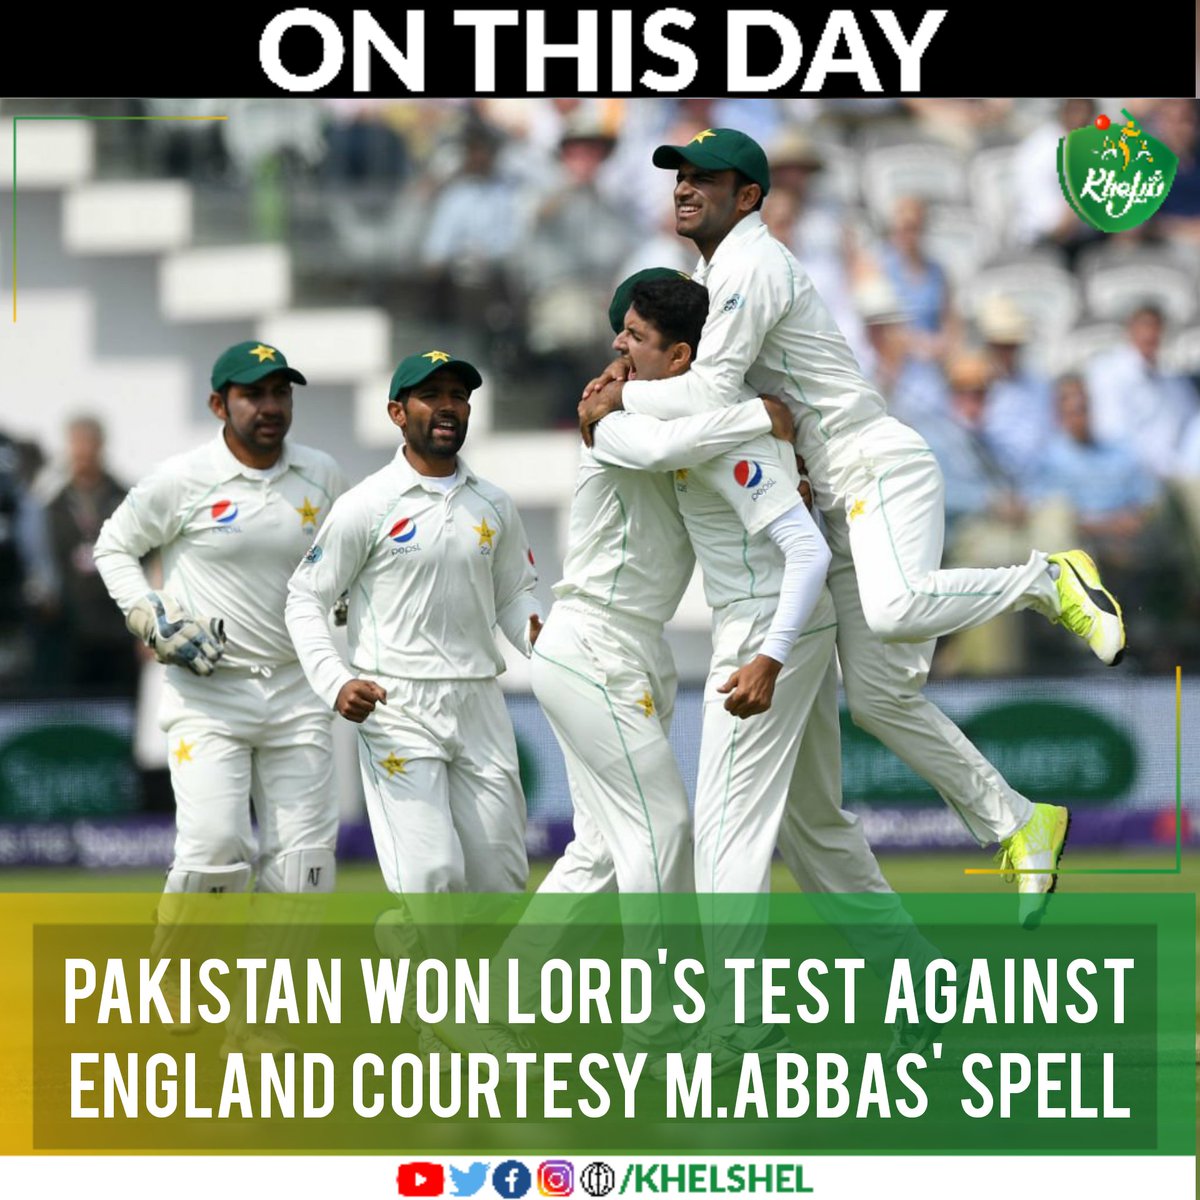 #OnThisDay in 2018, @RealMAbbas226' (4/23 and 4/41) helped Pakistan win Lord's Test by 9 wickets chasing 64 in the fourth inning under @SarfarazA_54's captaincy. #ENGvPAK | #Cricket | #Pakistan | #MohammadAbbas | #SarfarazAhmed | #Lords